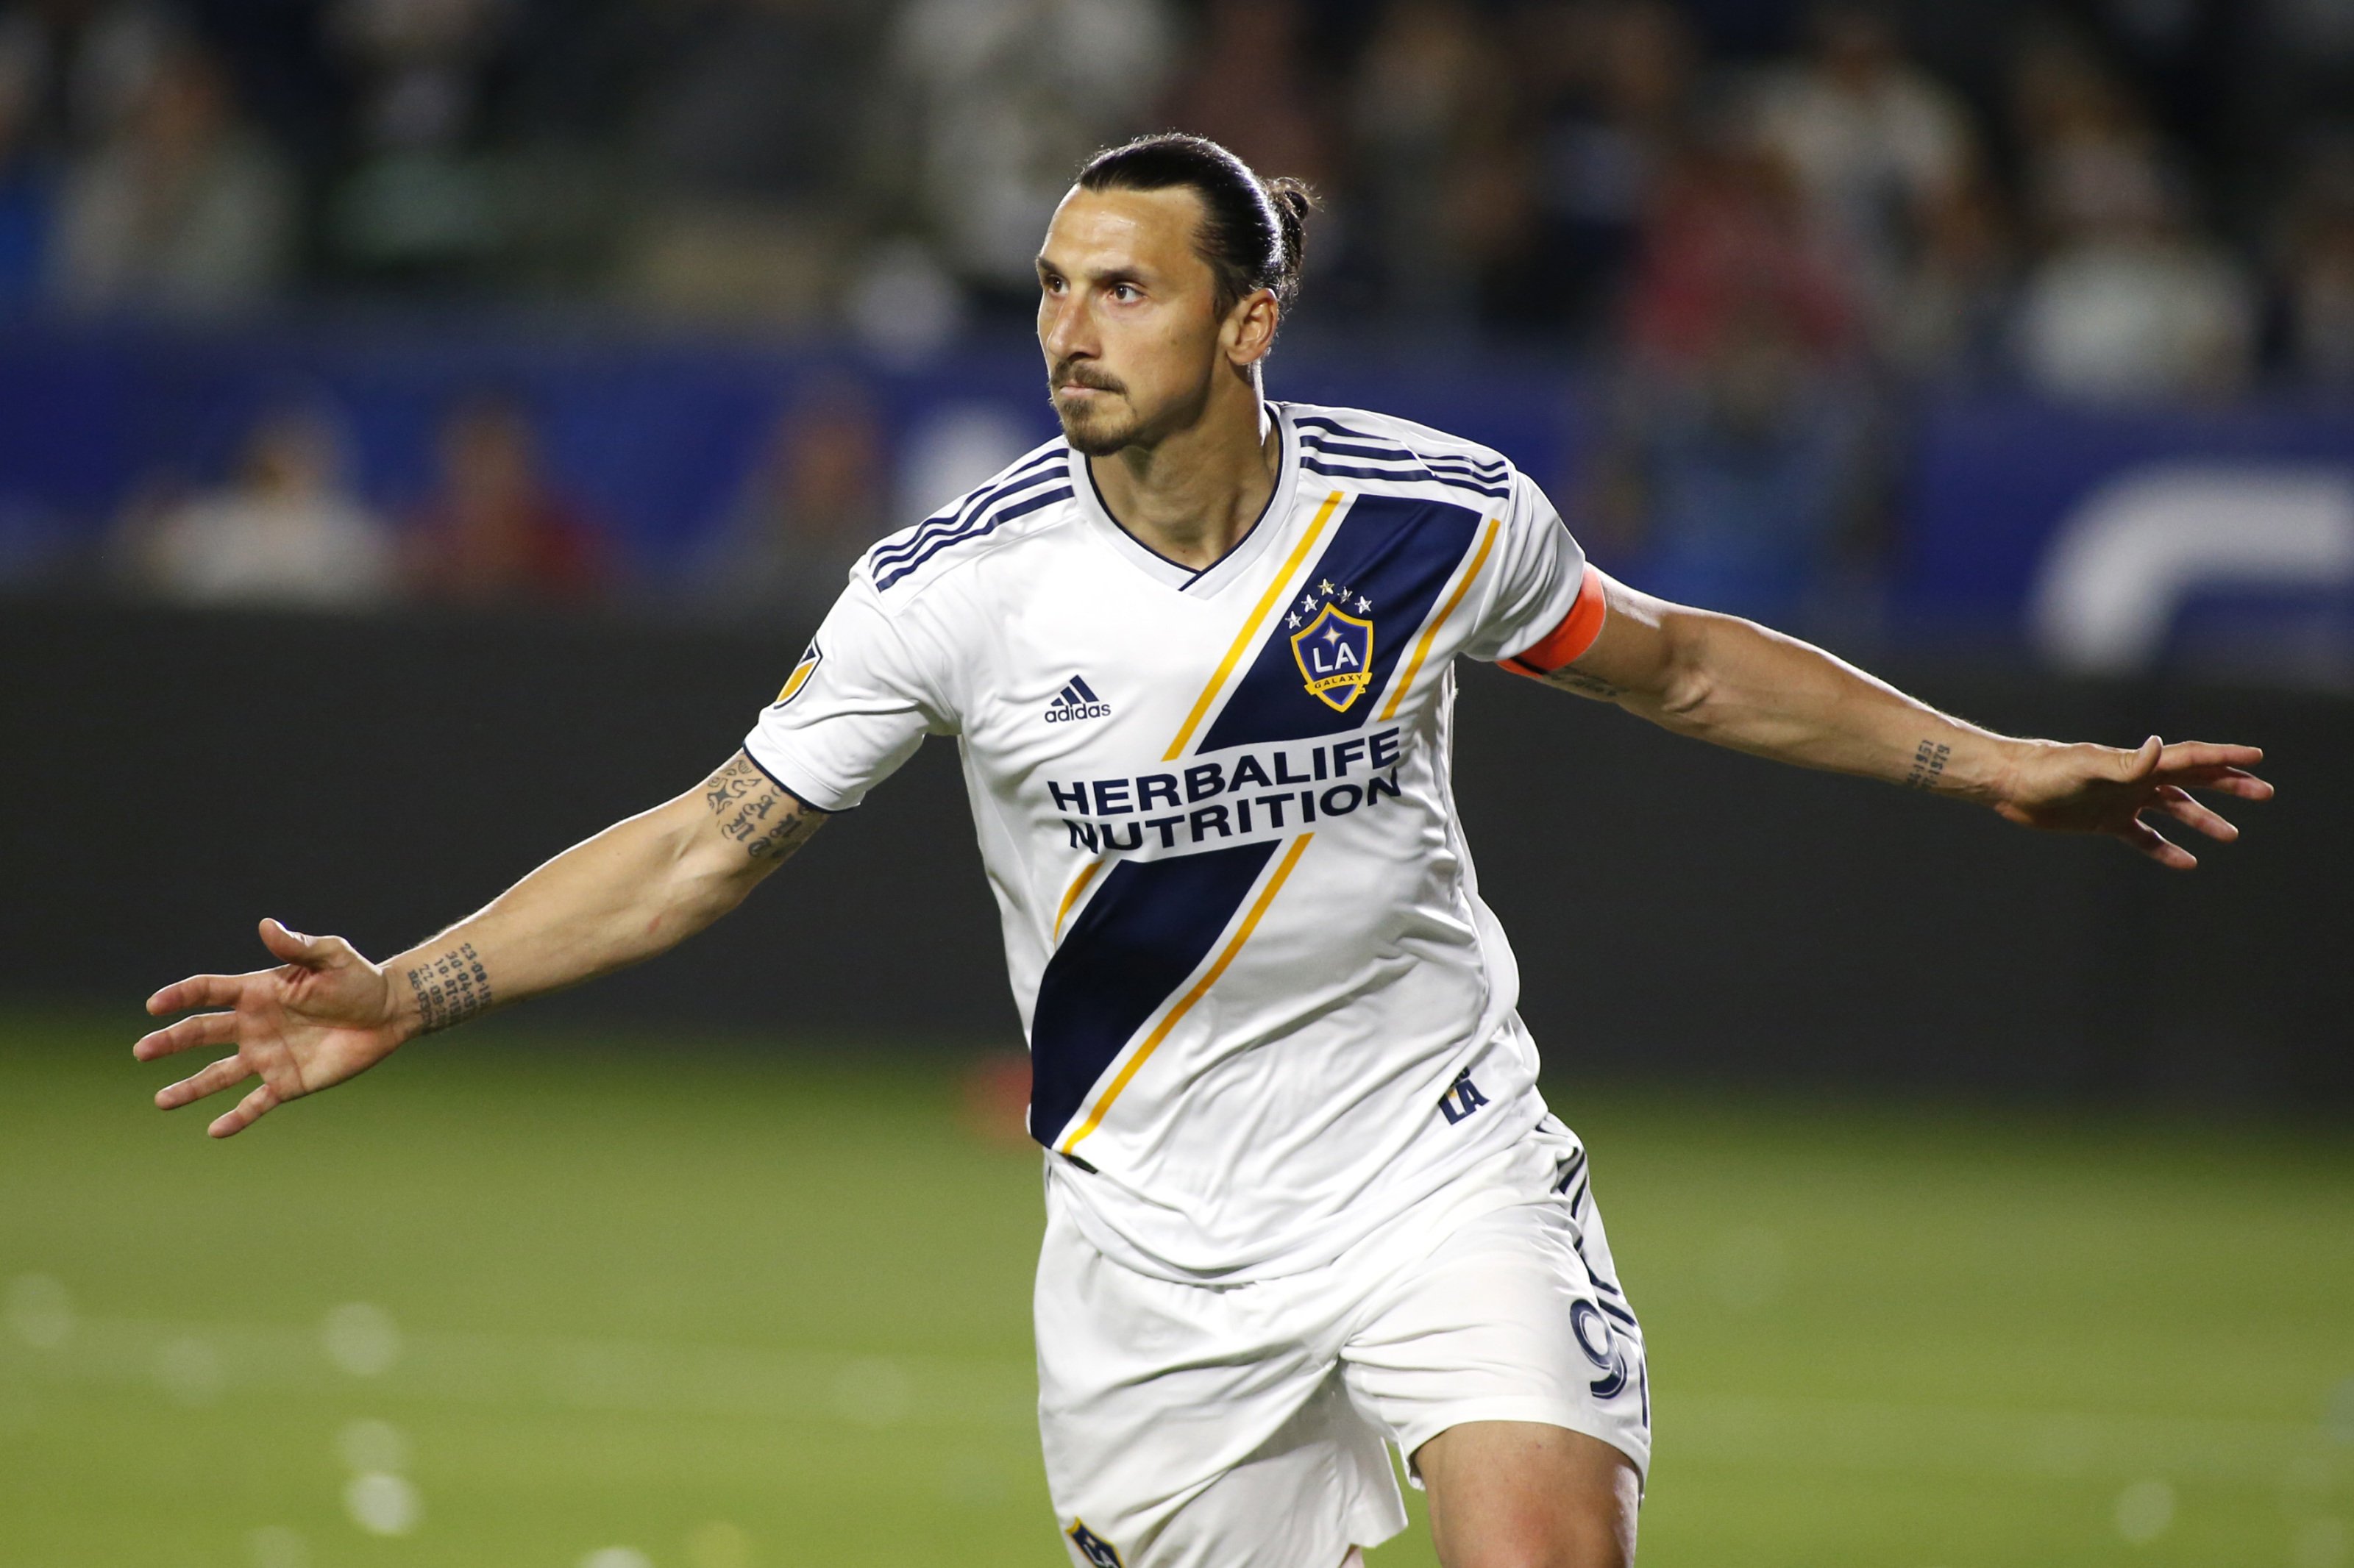 LA Galaxy: How can they go from good to great?